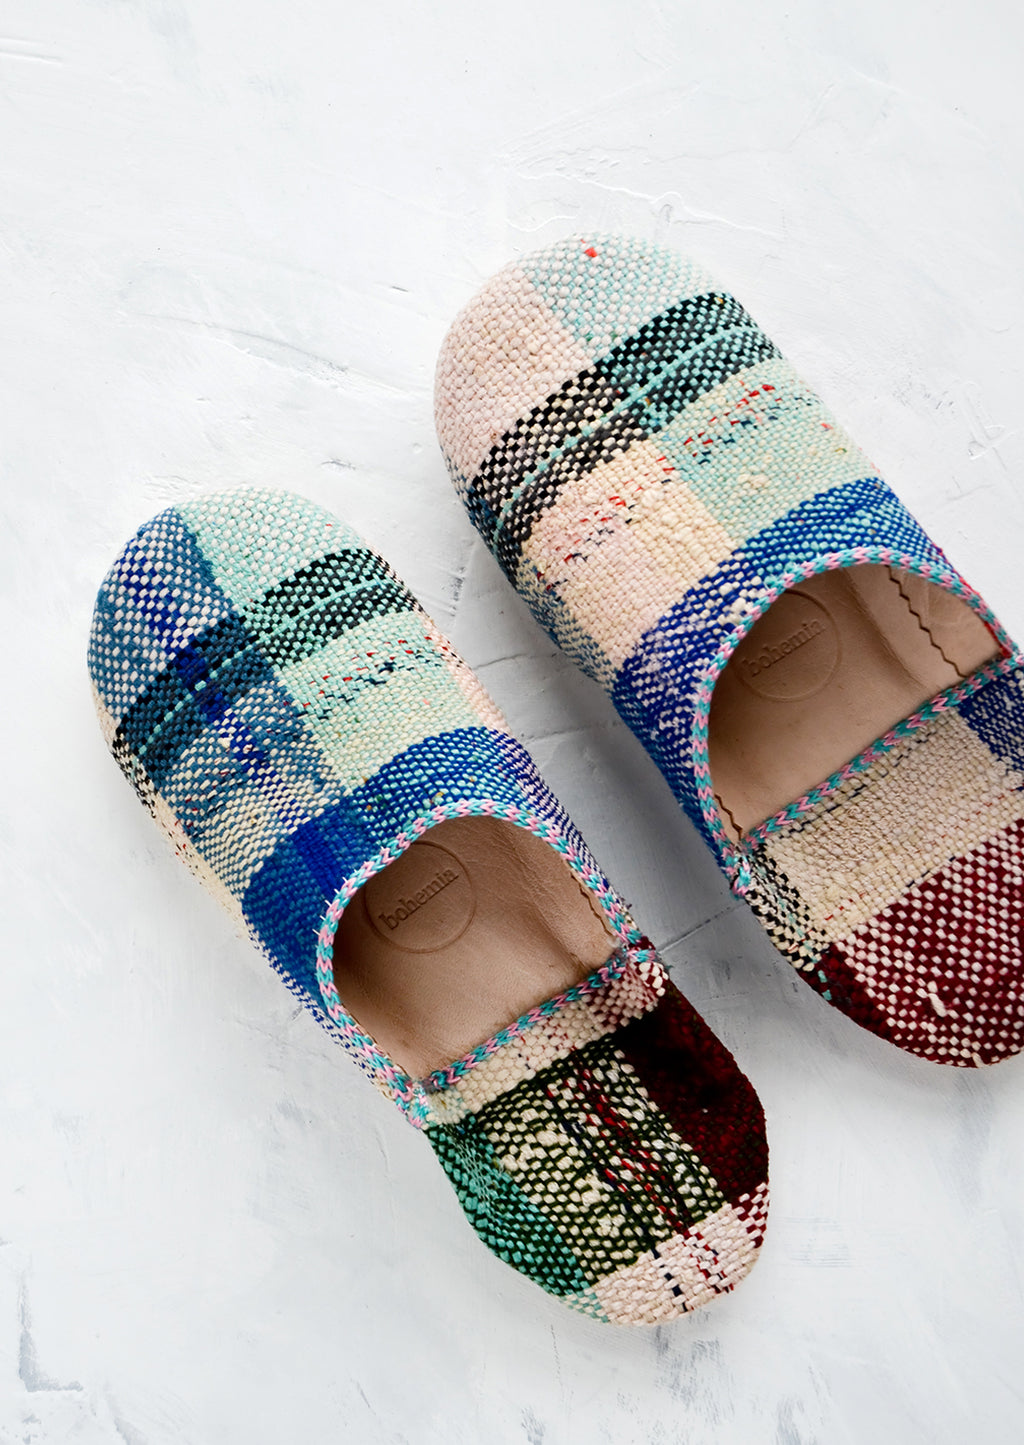 3: A single pair of house slippers made from colorful plaid melange fabric.